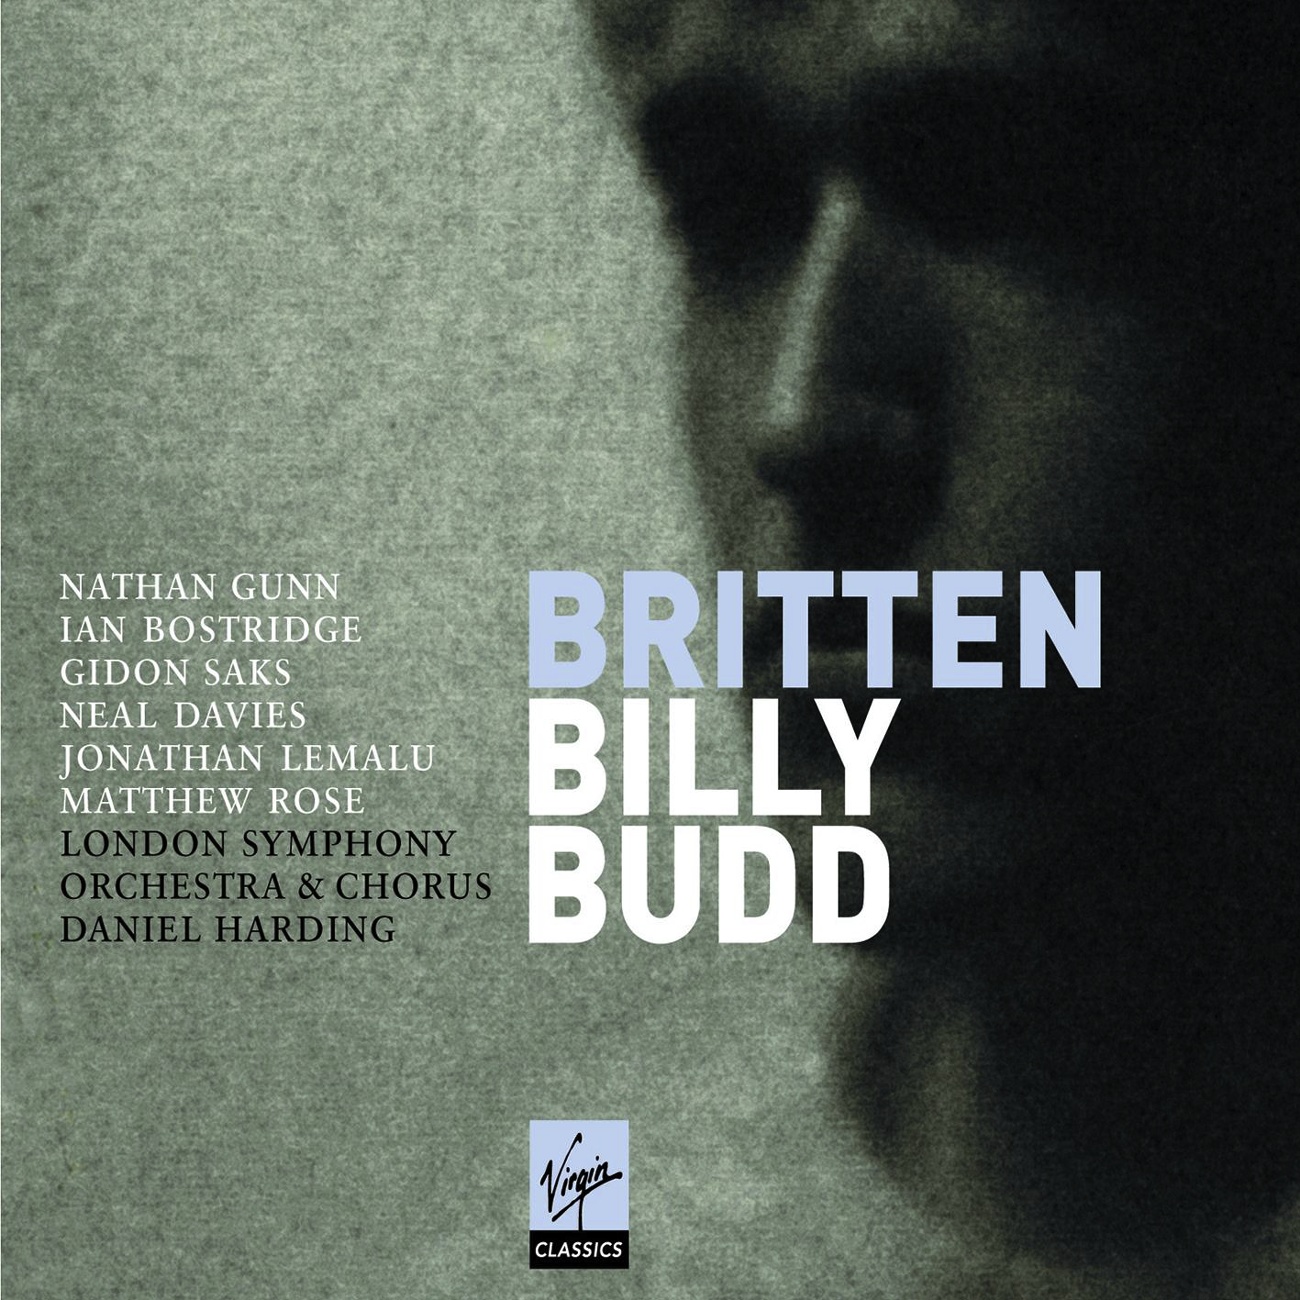 Billy Budd: Master-at-arms and foretopman, I speak to you both (Vere/Claggart/Billy)